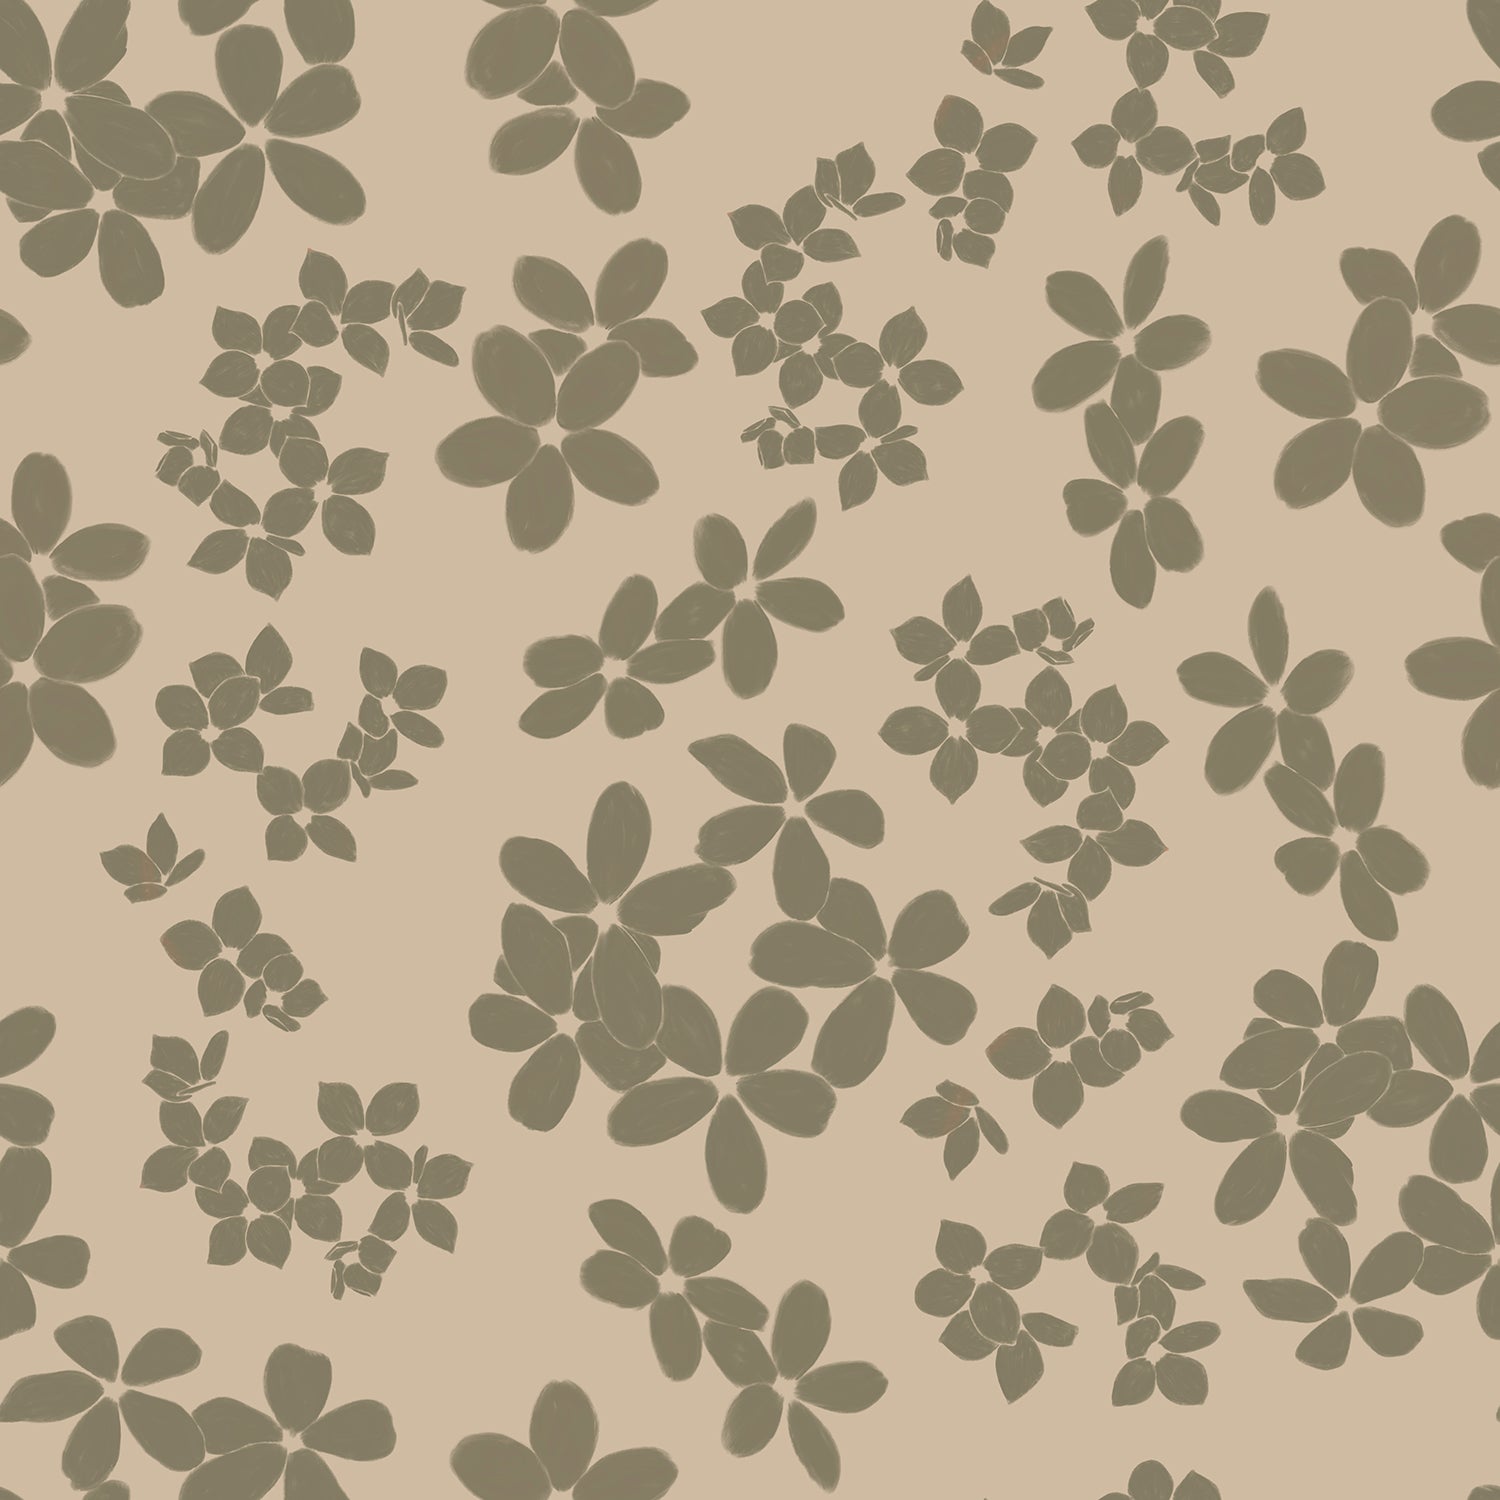 A subtle and charming wallpaper design named "Little Flowers" featuring clusters of small green floral motifs scattered across a beige background. The flowers are stylized and compact, offering a delicate and understated look that brings a touch of nature's simplicity to any room.